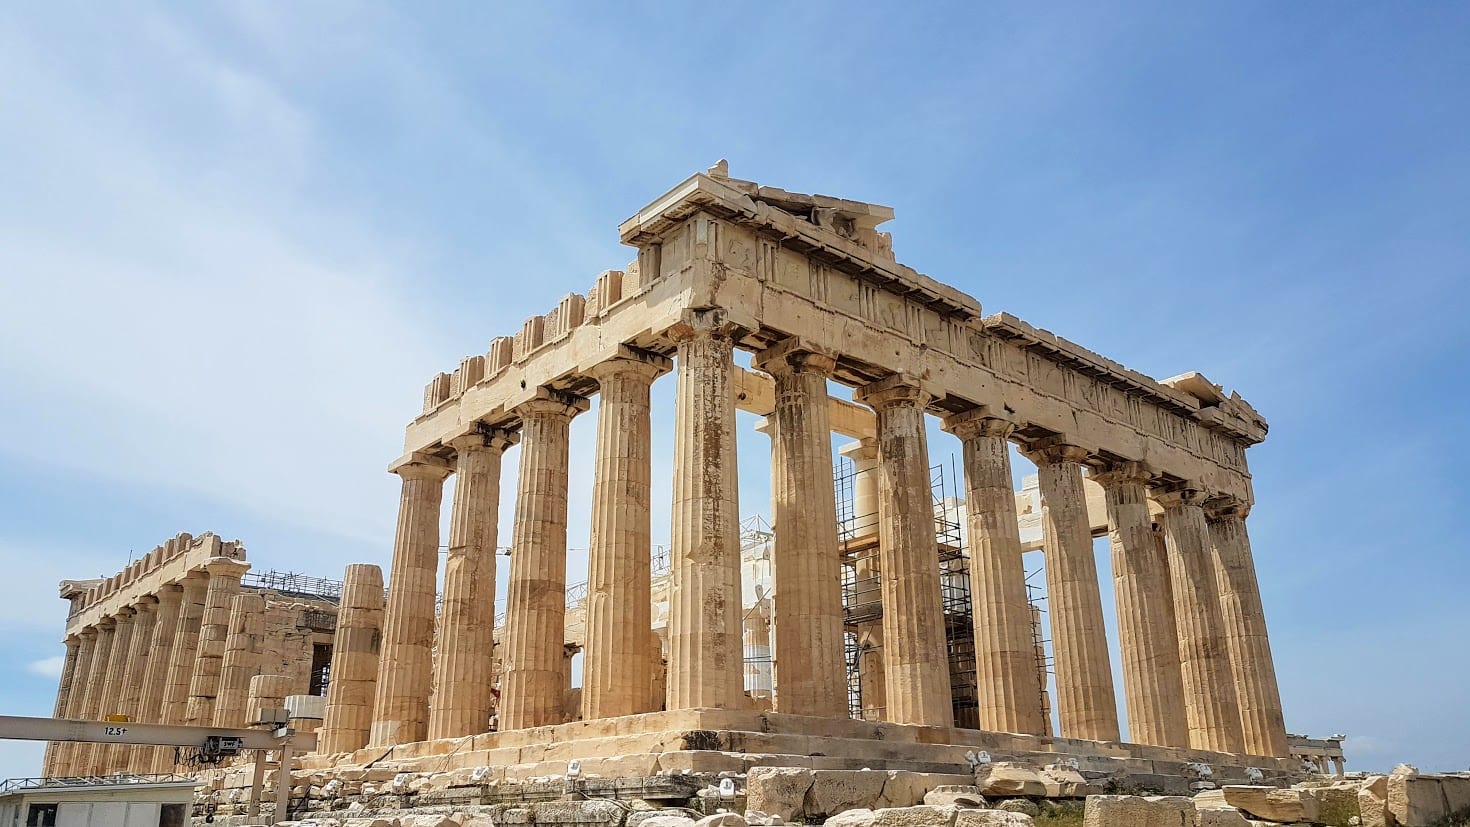 The famous Parthenon in Athens Greece